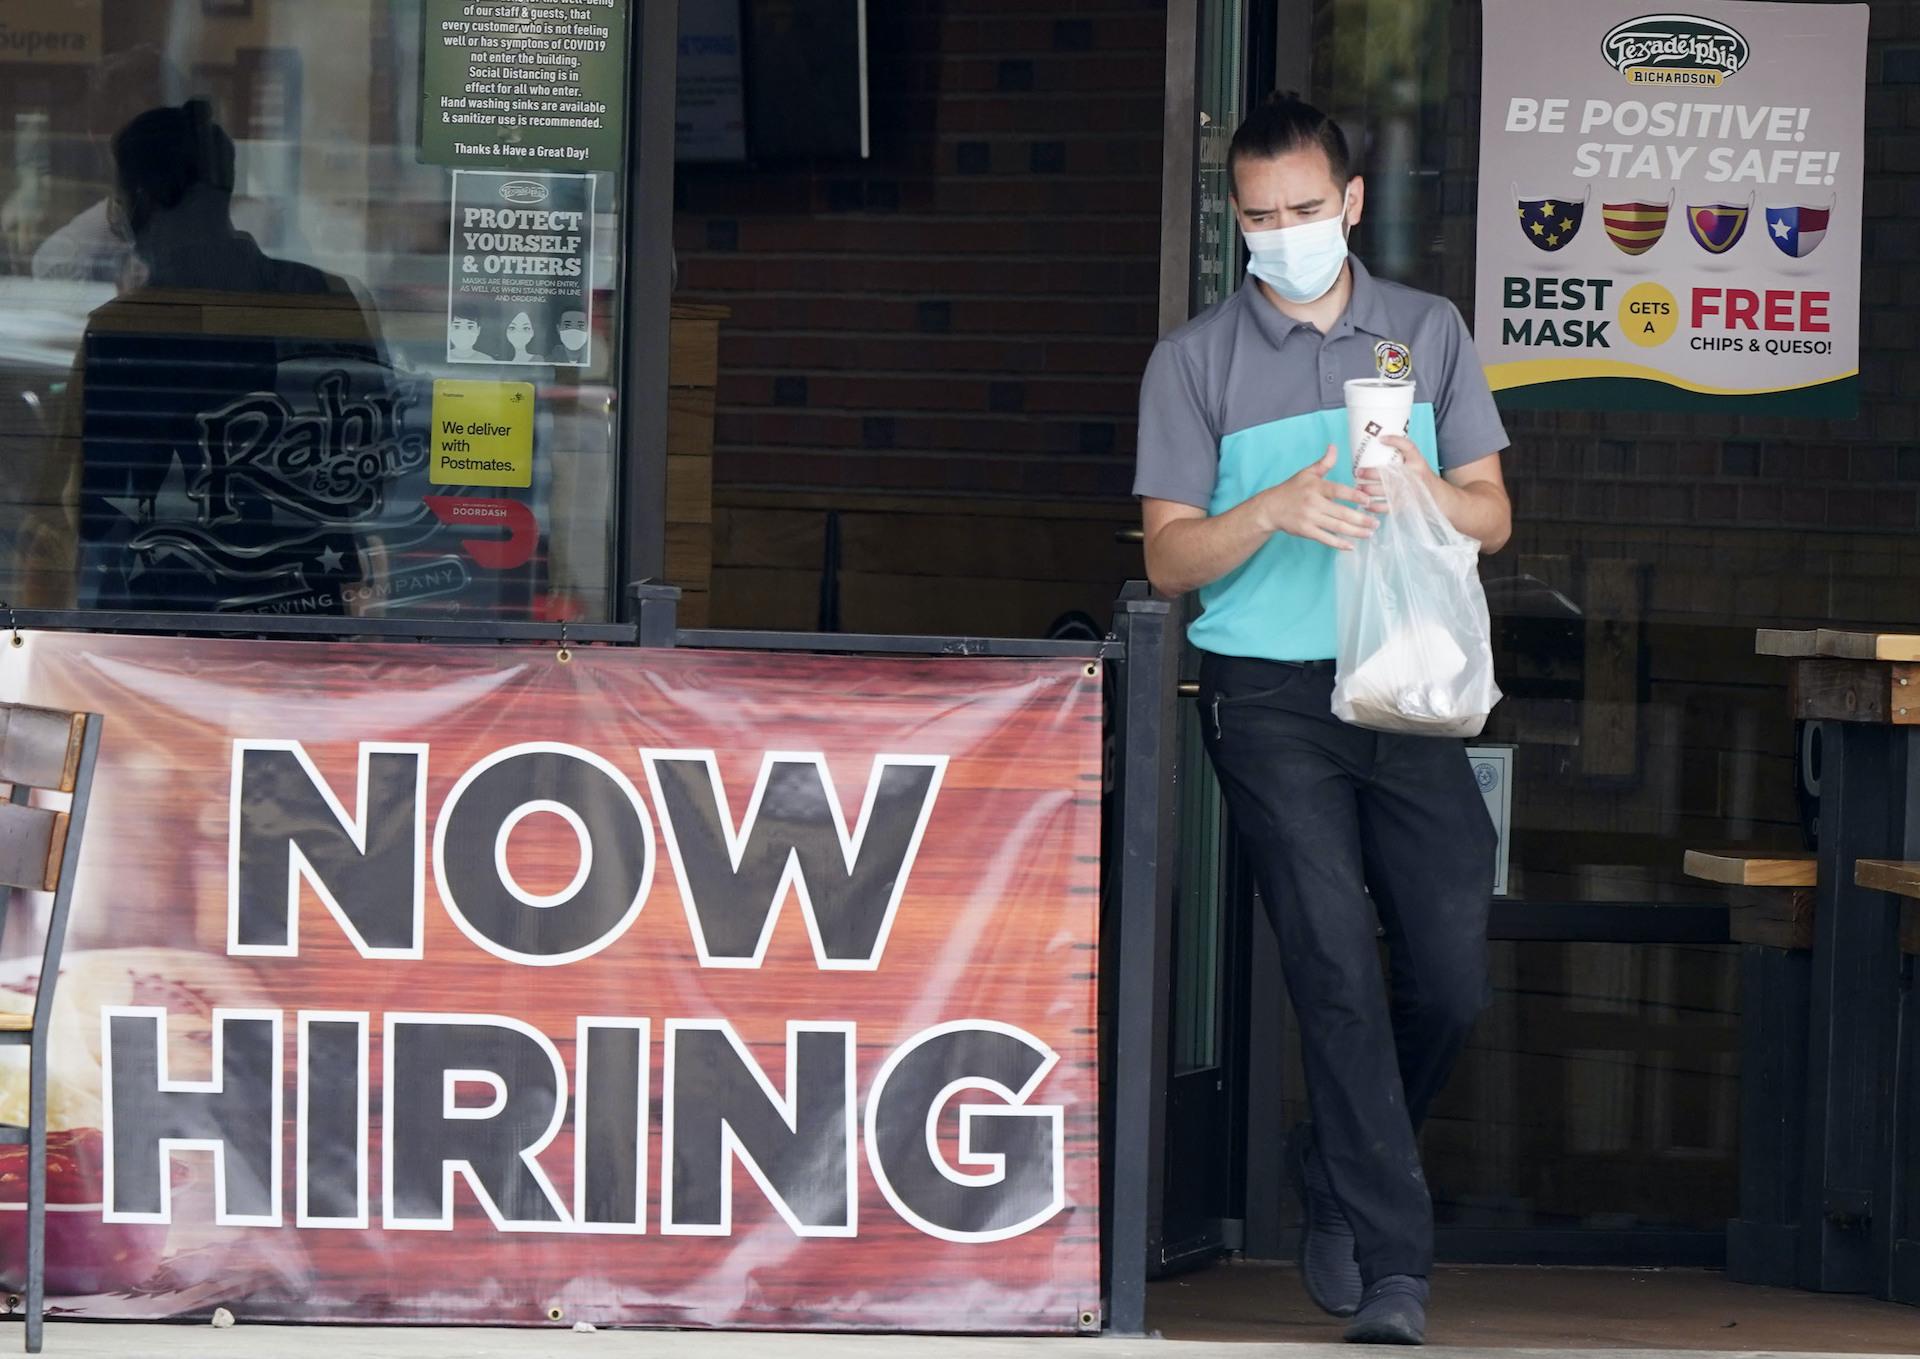 In this Sept. 2, 2020 file photo, a customer wears a face mask as they carry their order past a now hiring sign at an eatery in Richardson, Texas. (AP Photo/LM Otero, File)